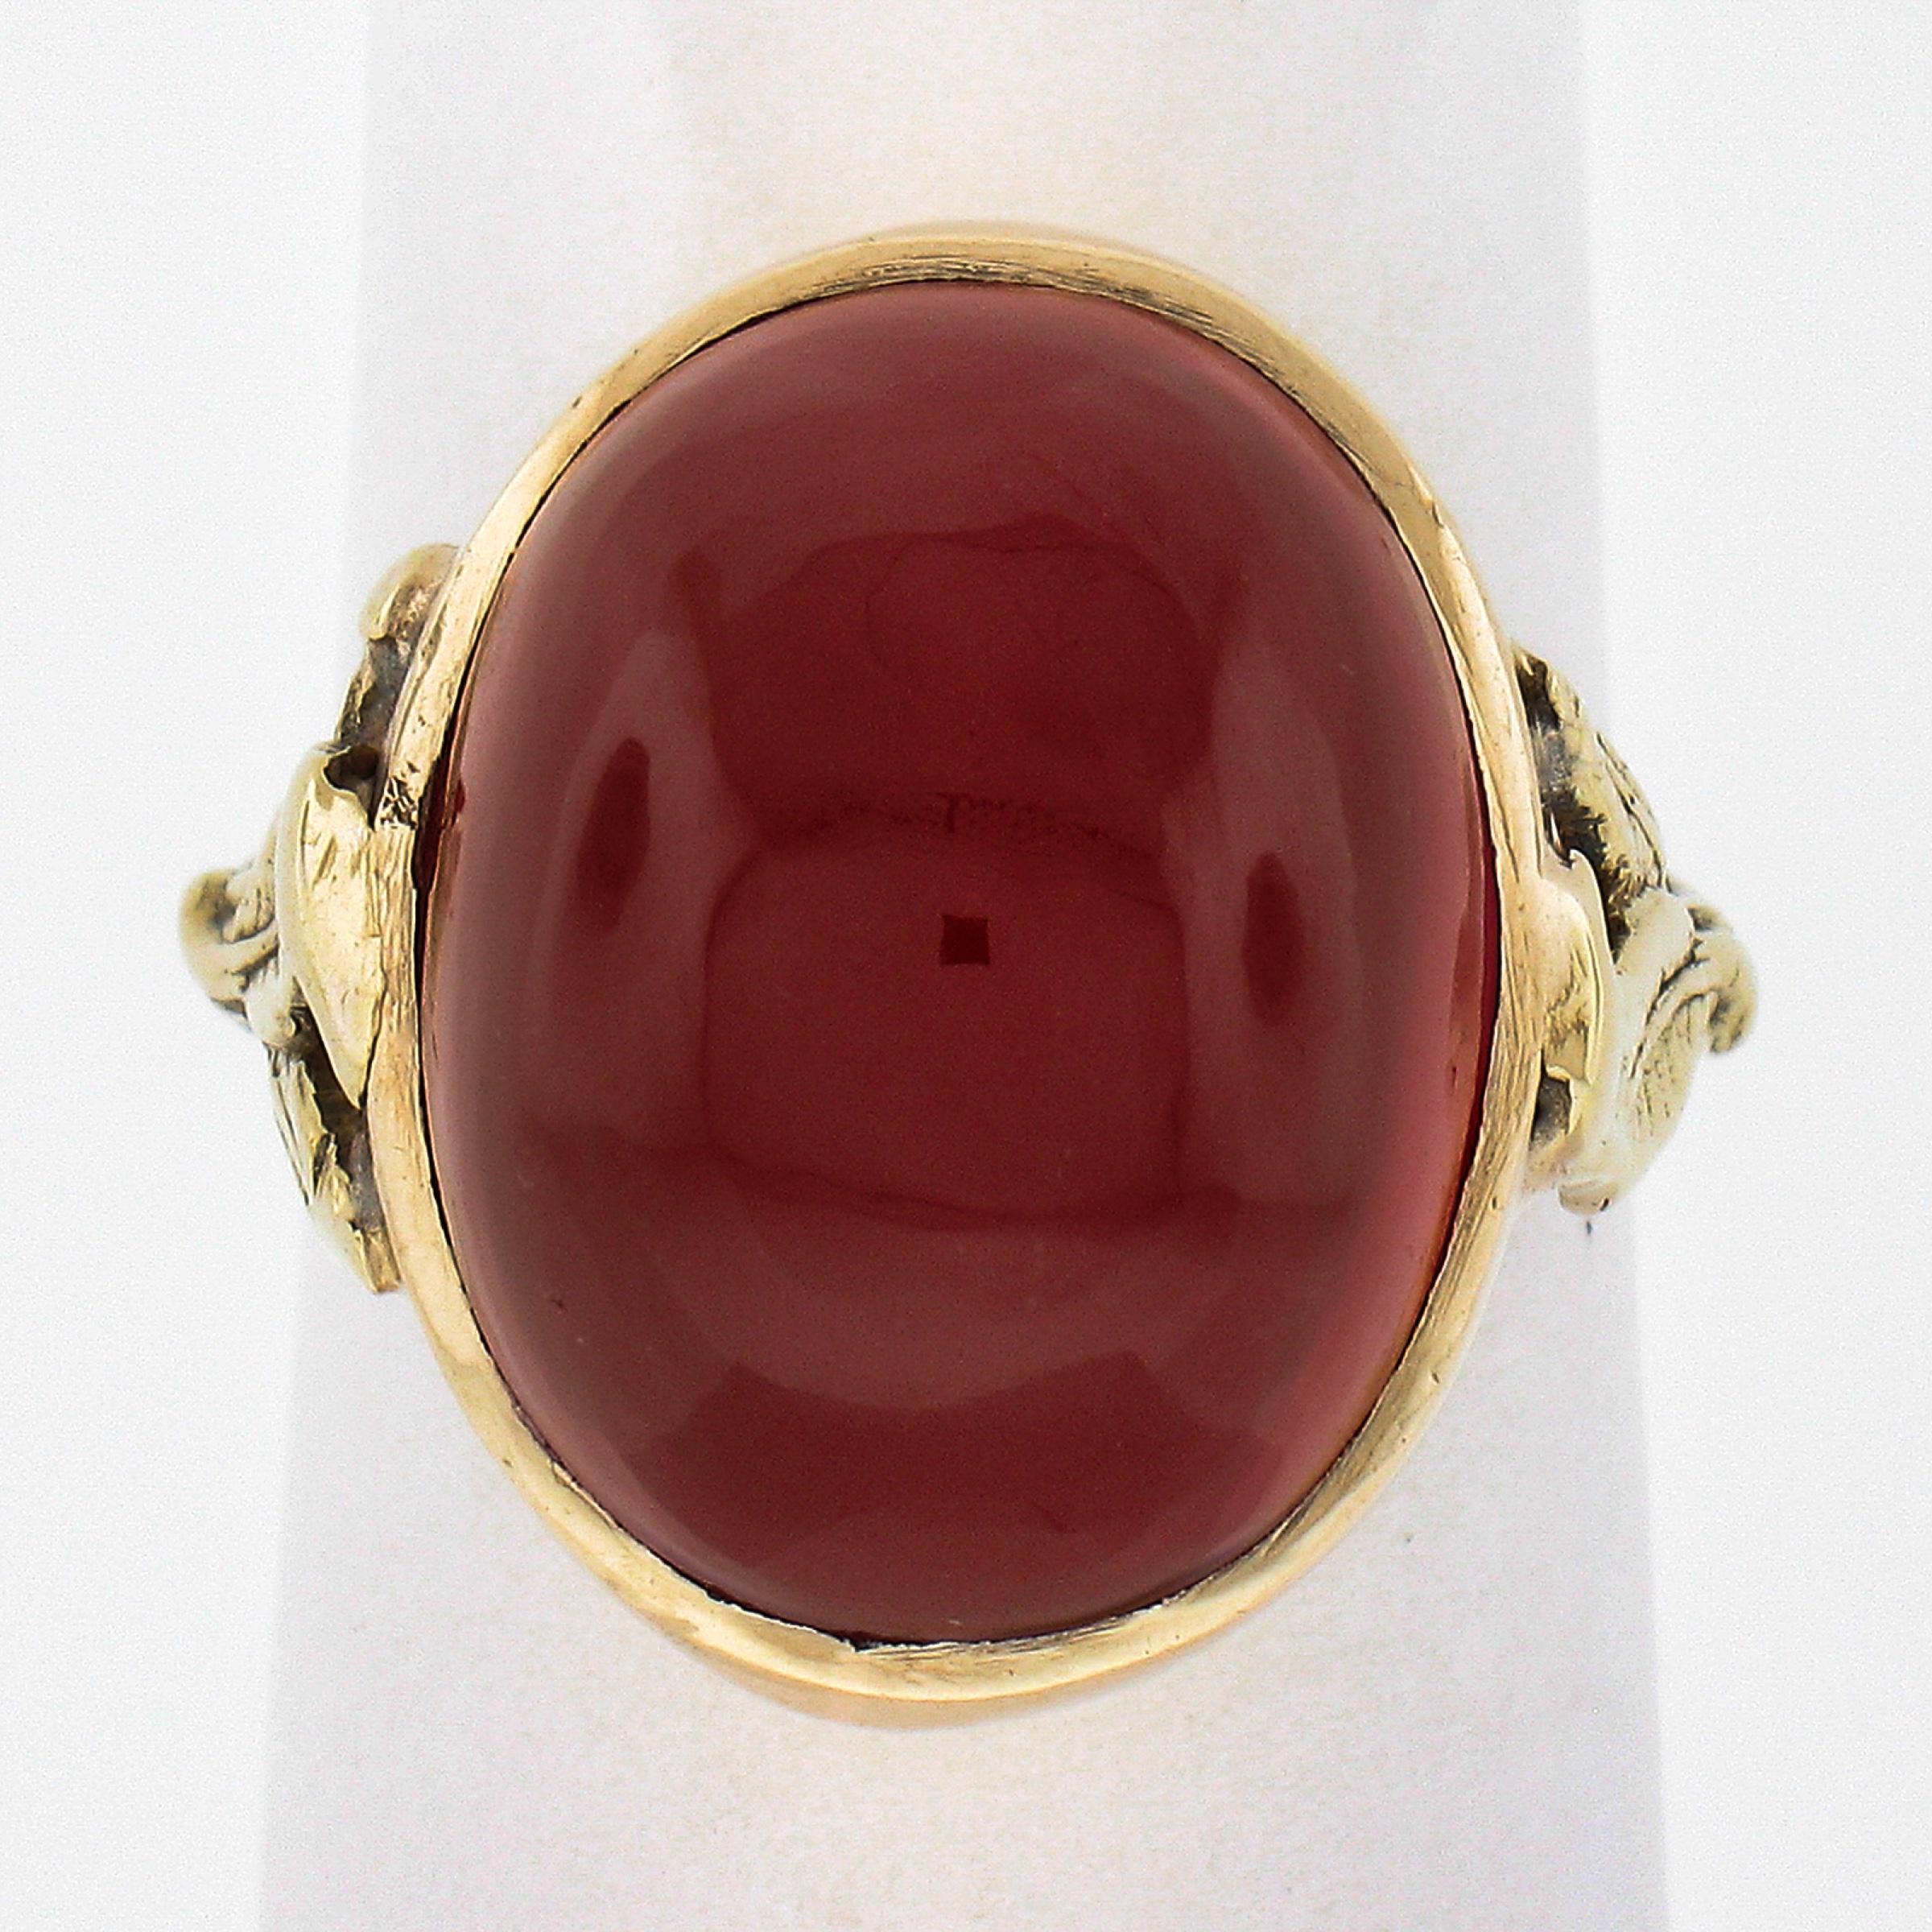 Here we have a beautiful antique solitaire ring crafted from solid 14k yellow gold during the Arts & Crafts movement and features a large, oval cabochon cut, red stone neatly bezel set at the center. This stone stands out with its super attractive